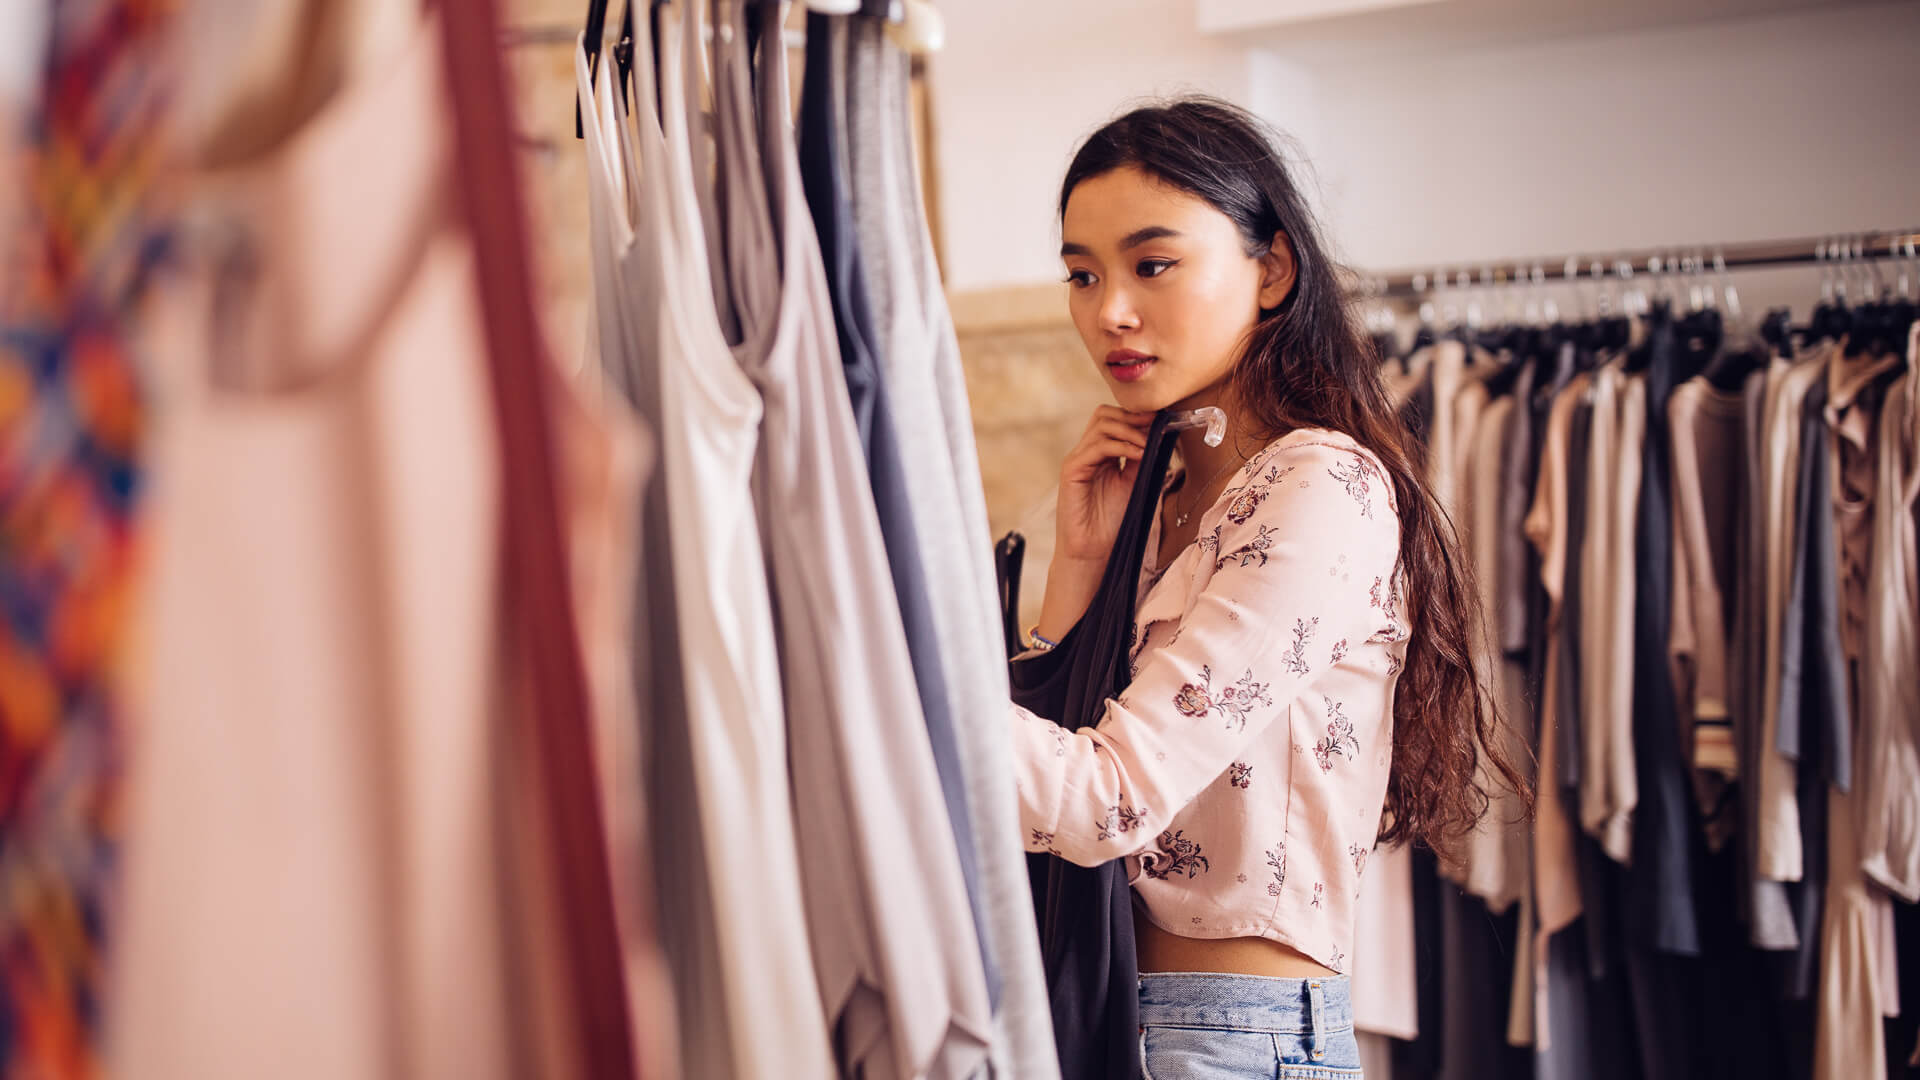 The 19 Best Places to Shop for Clothes Online of 2023